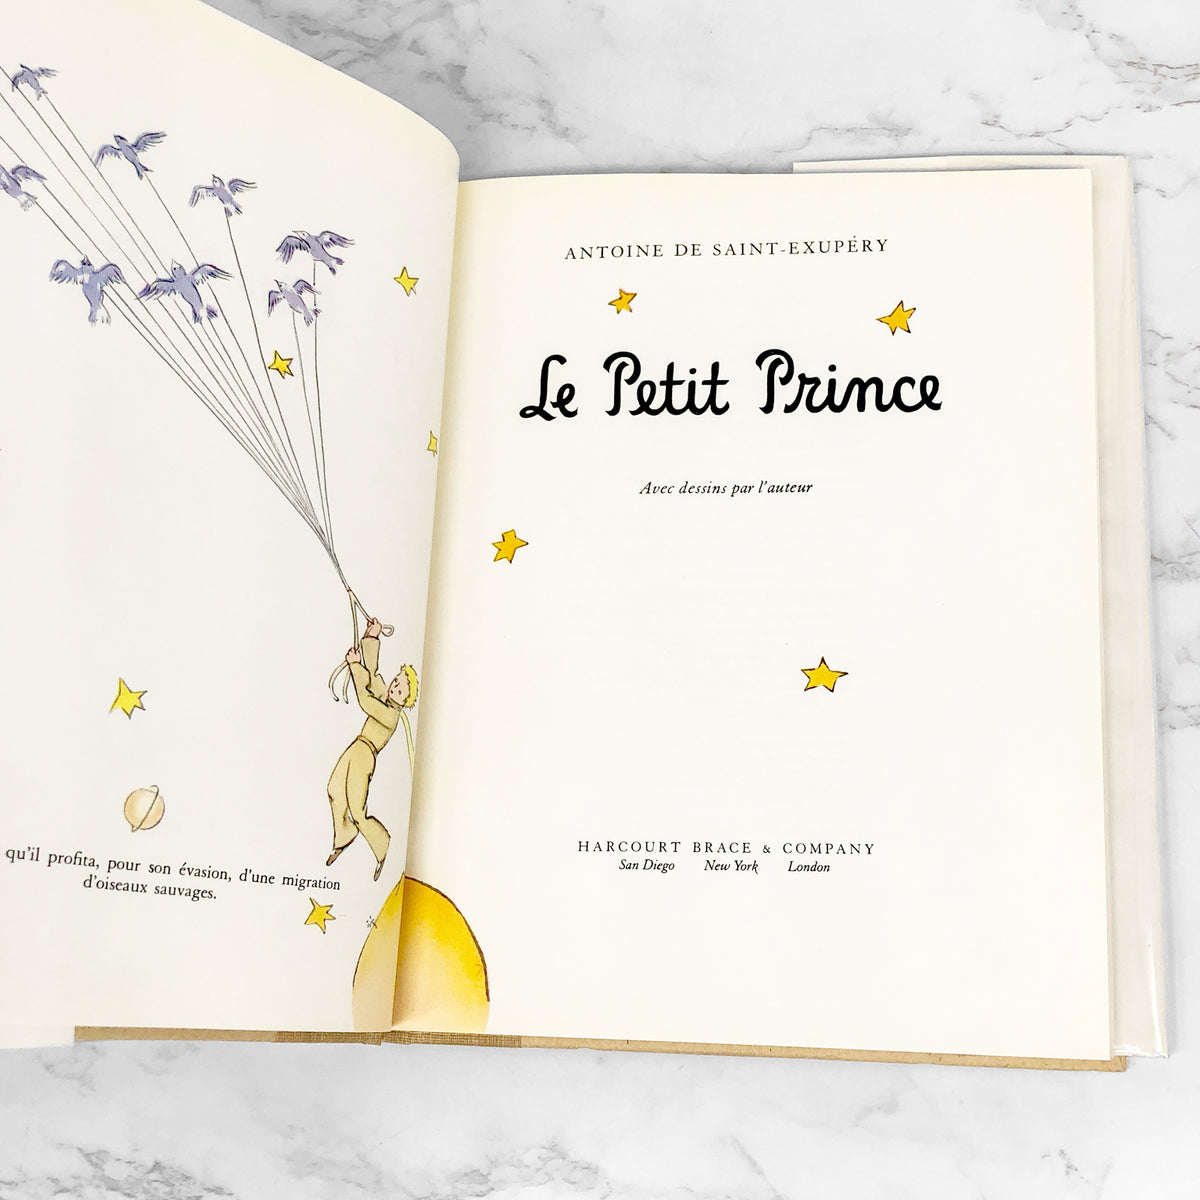 Le Petit Prince: The Little Prince (French Edition) (Hardcover) 